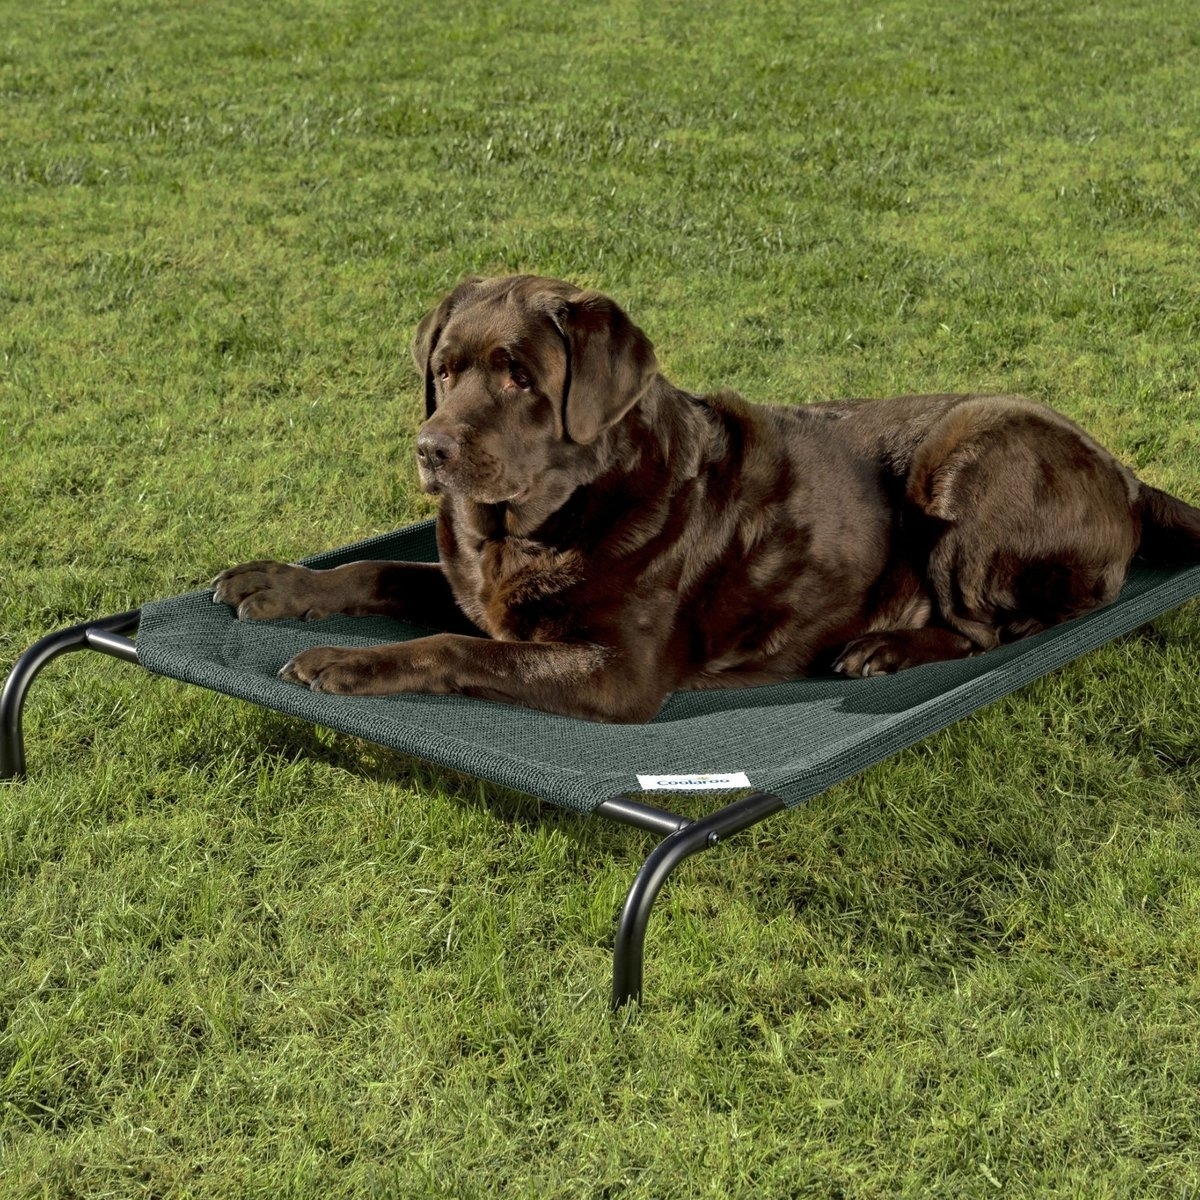 A large dog lies comfortably on an elevated pet bed placed on a grass lawn. The bed has a mesh surface and sturdy metal legs